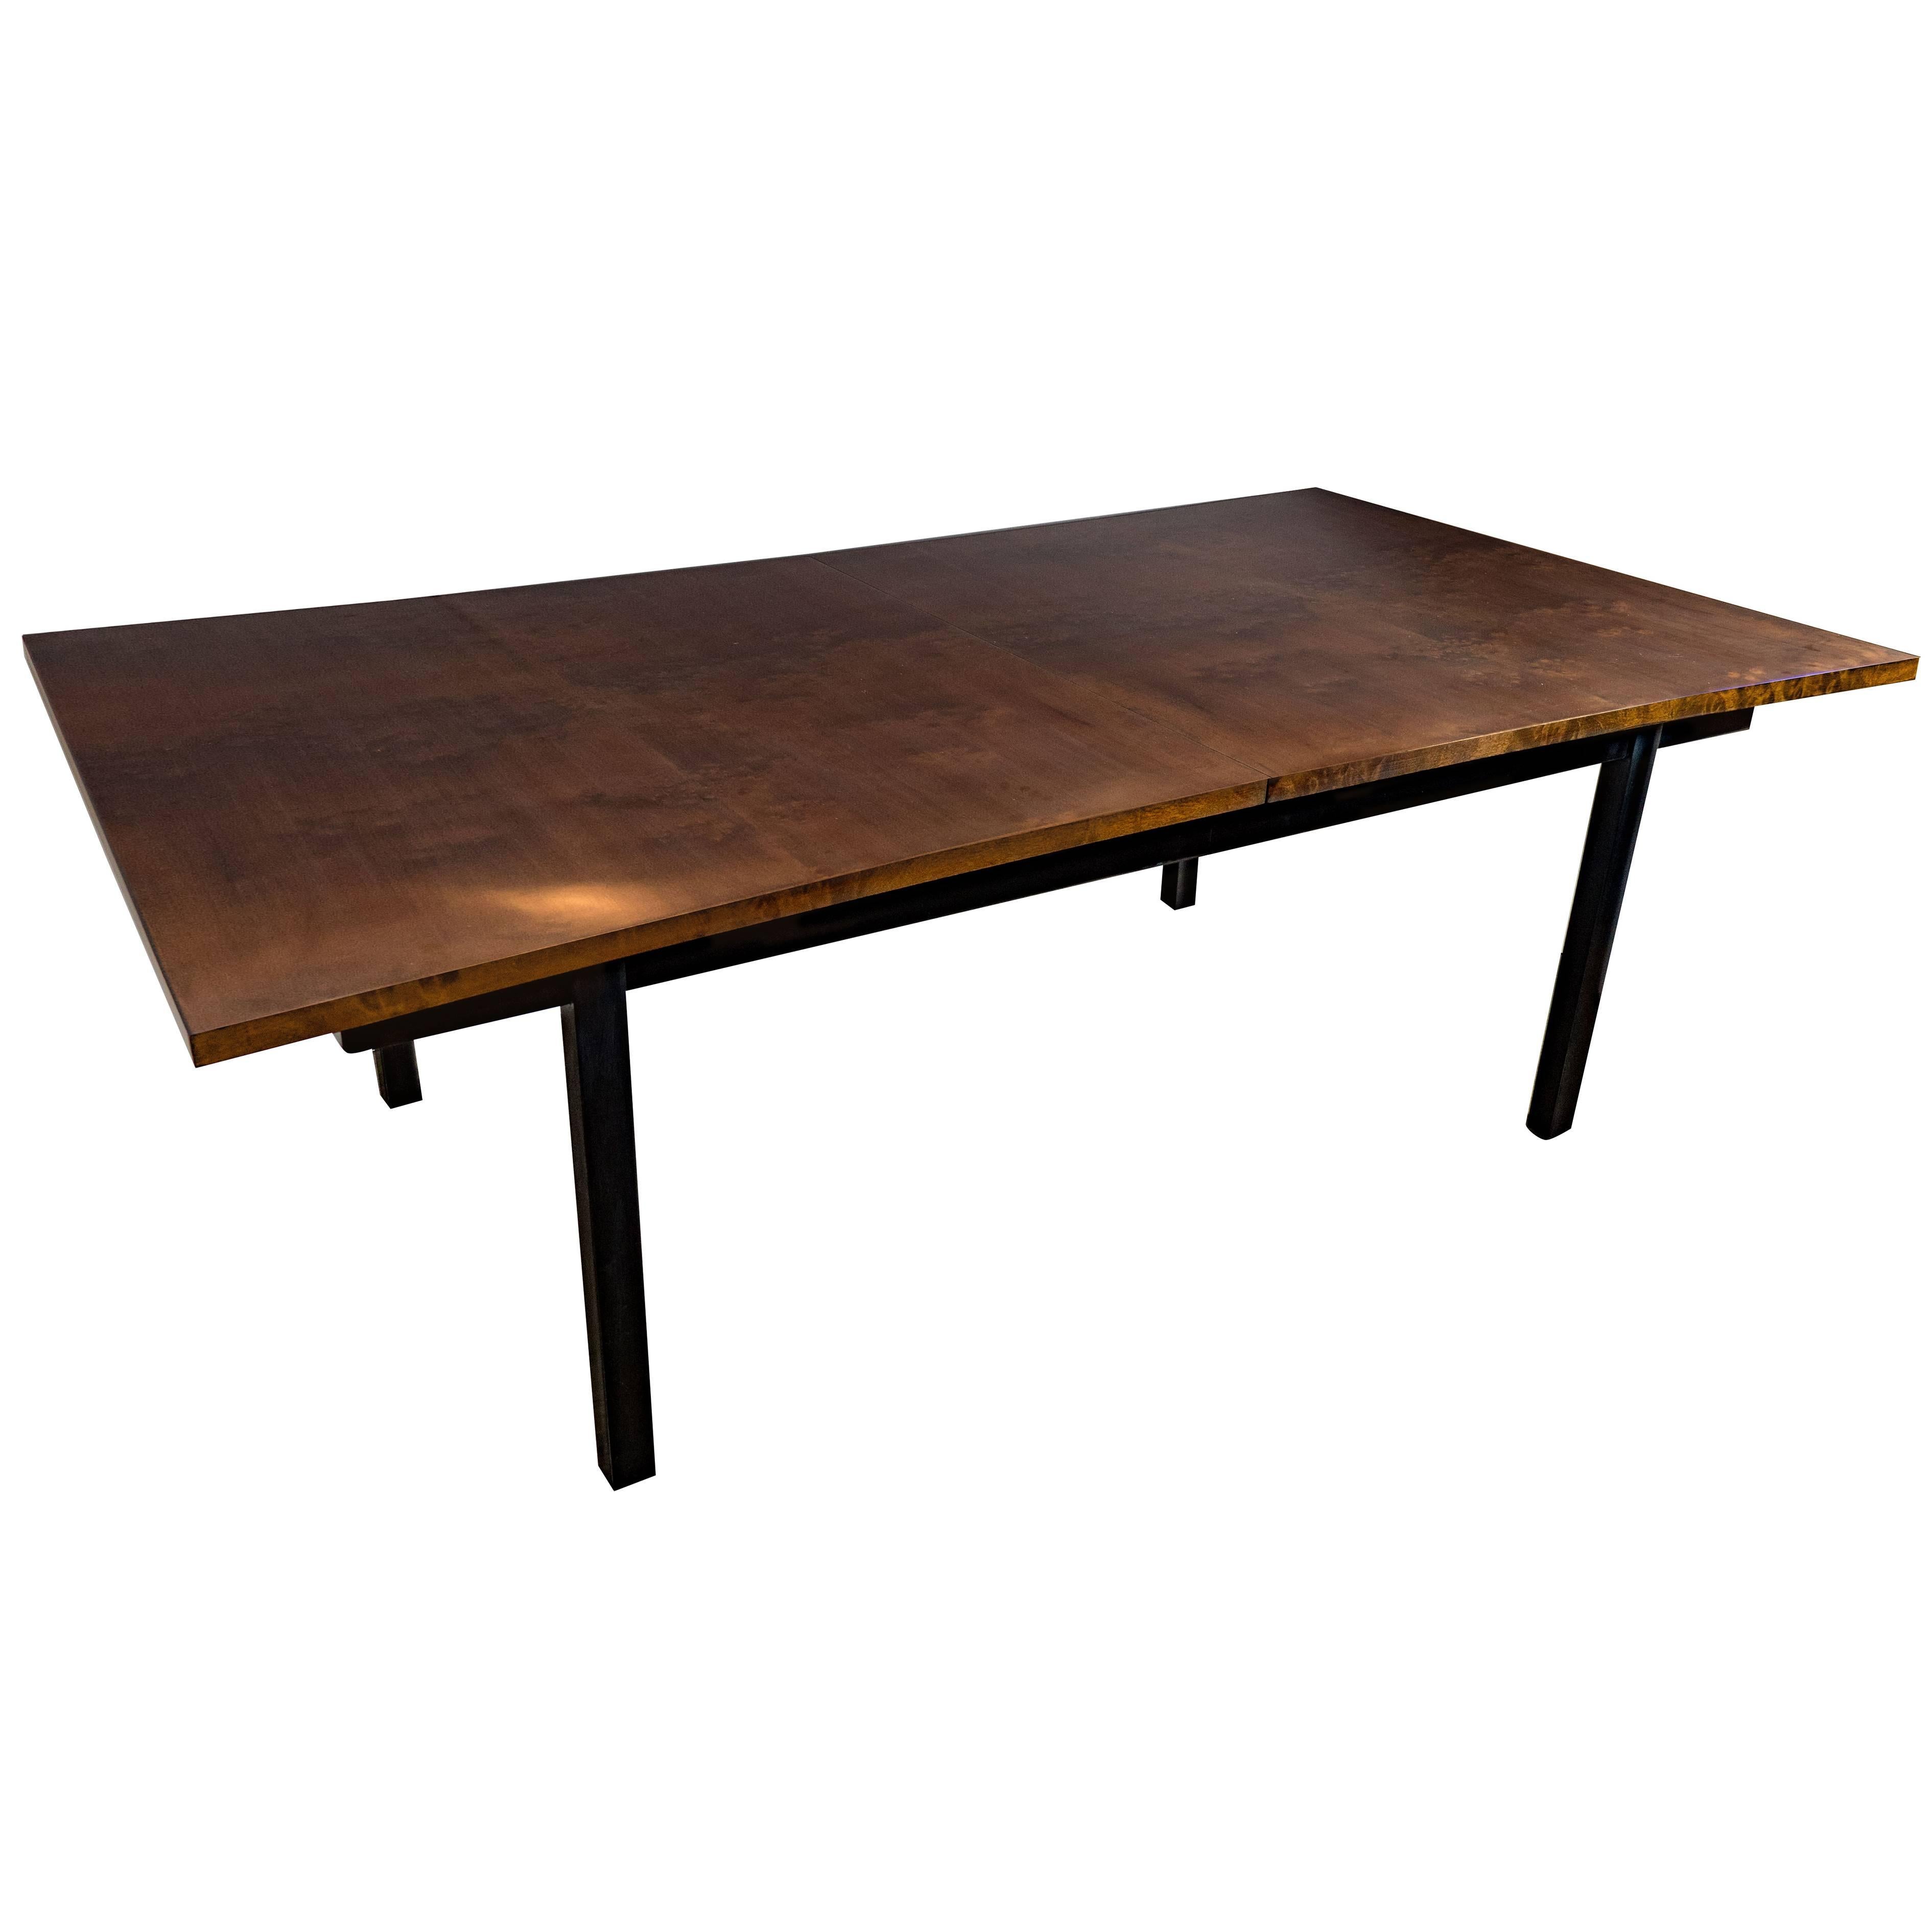 Extendable Parabolic Dining Table in Burled Walnut by Harold Schwartz